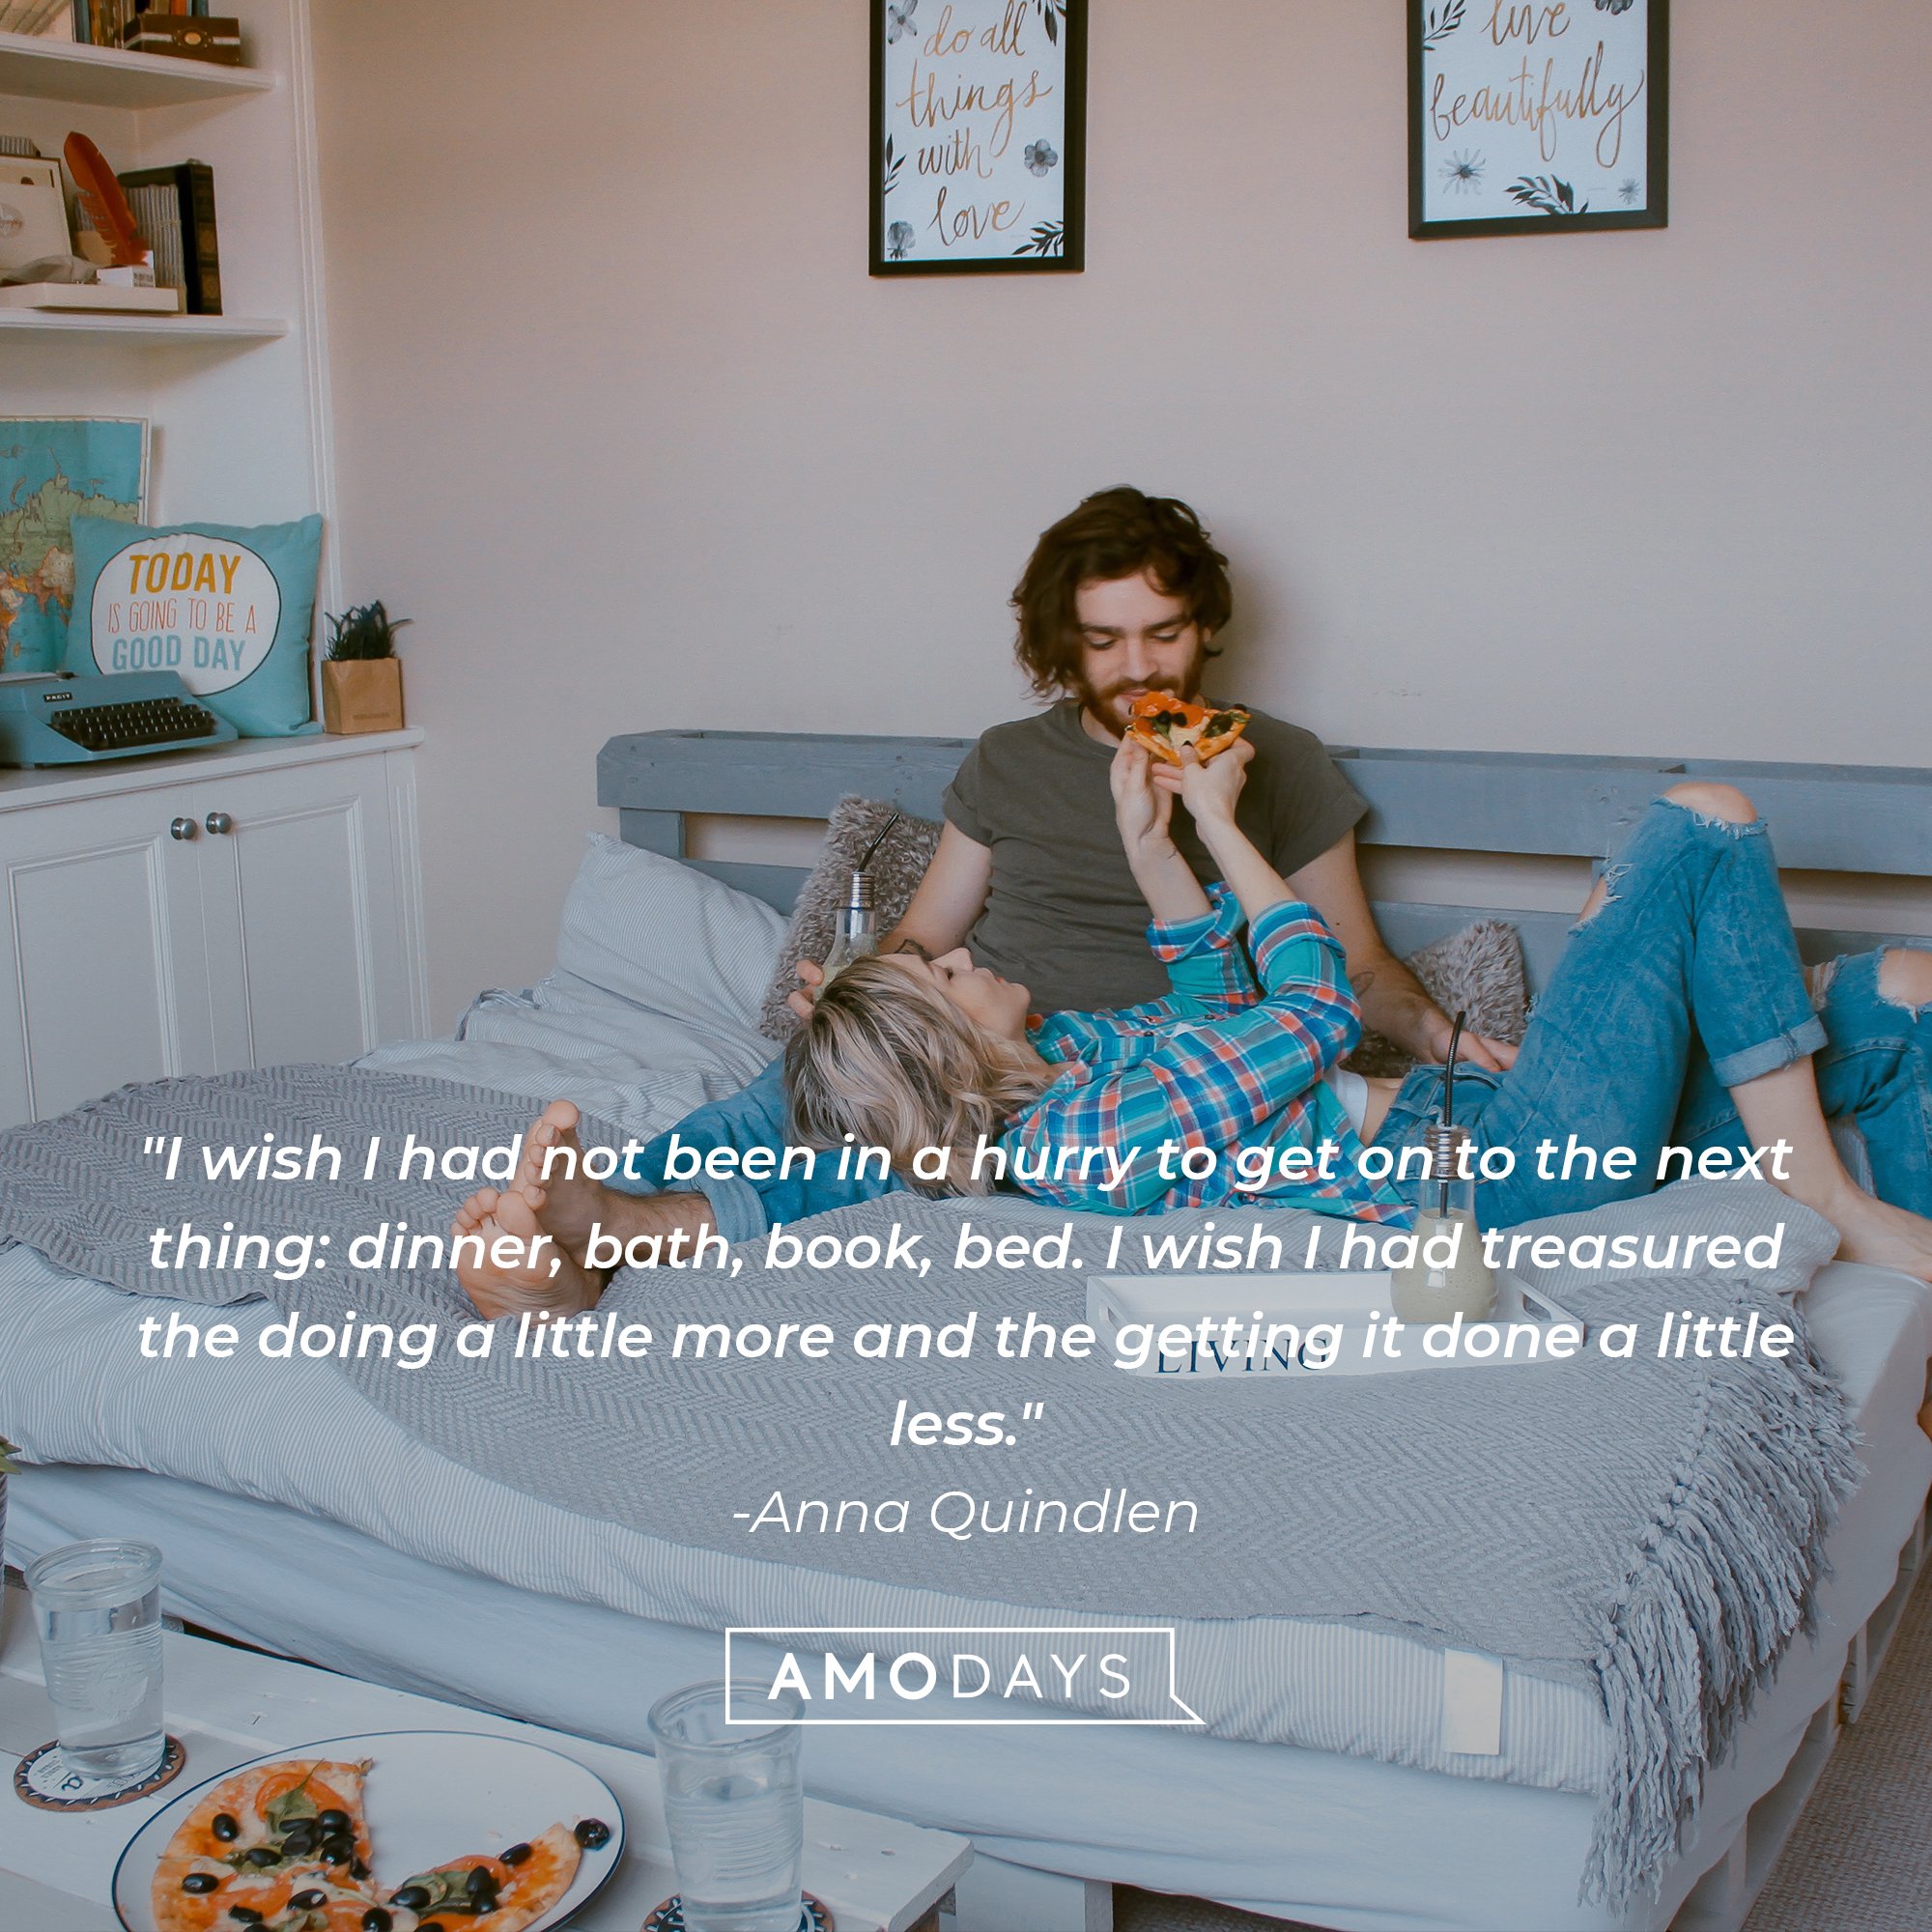 Anna Quindlen's quote: "I wish I had not been in a hurry to get on to the next thing: dinner, bath, book, bed. I wish I had treasured the doing a little more and the getting it done a little less." | Image: AmoDays 